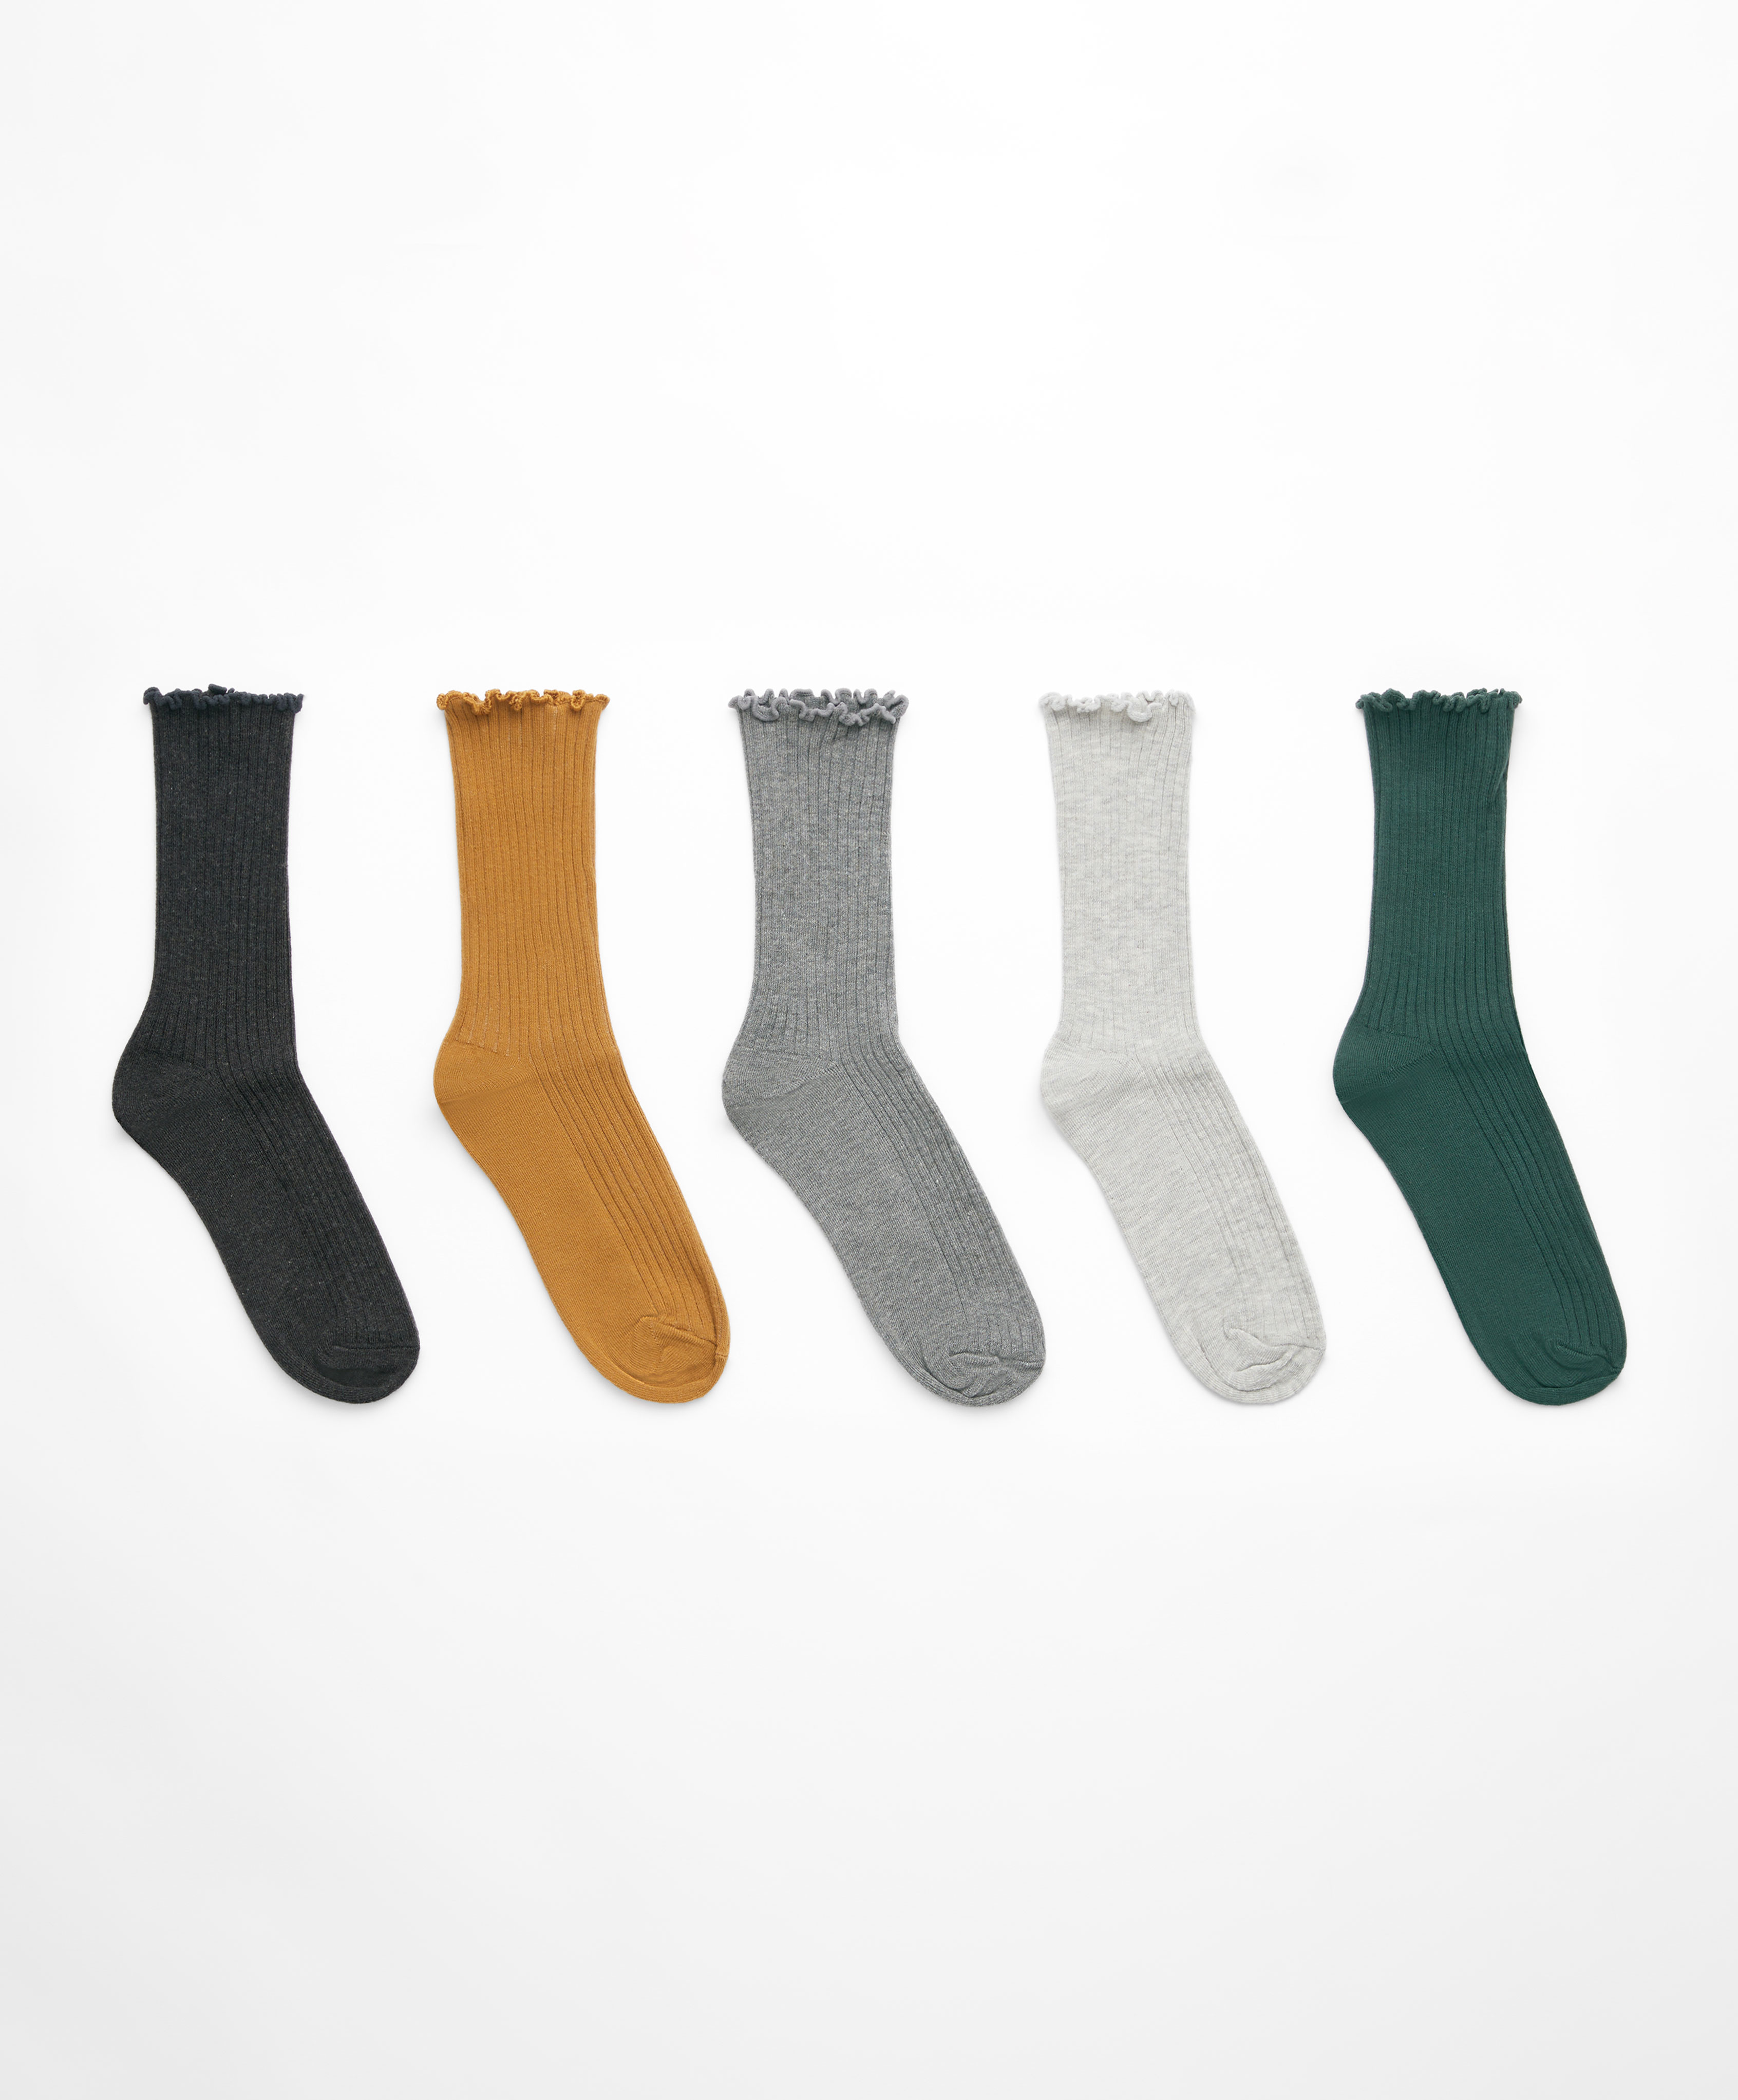 5 pairs of curling cotton classic socks